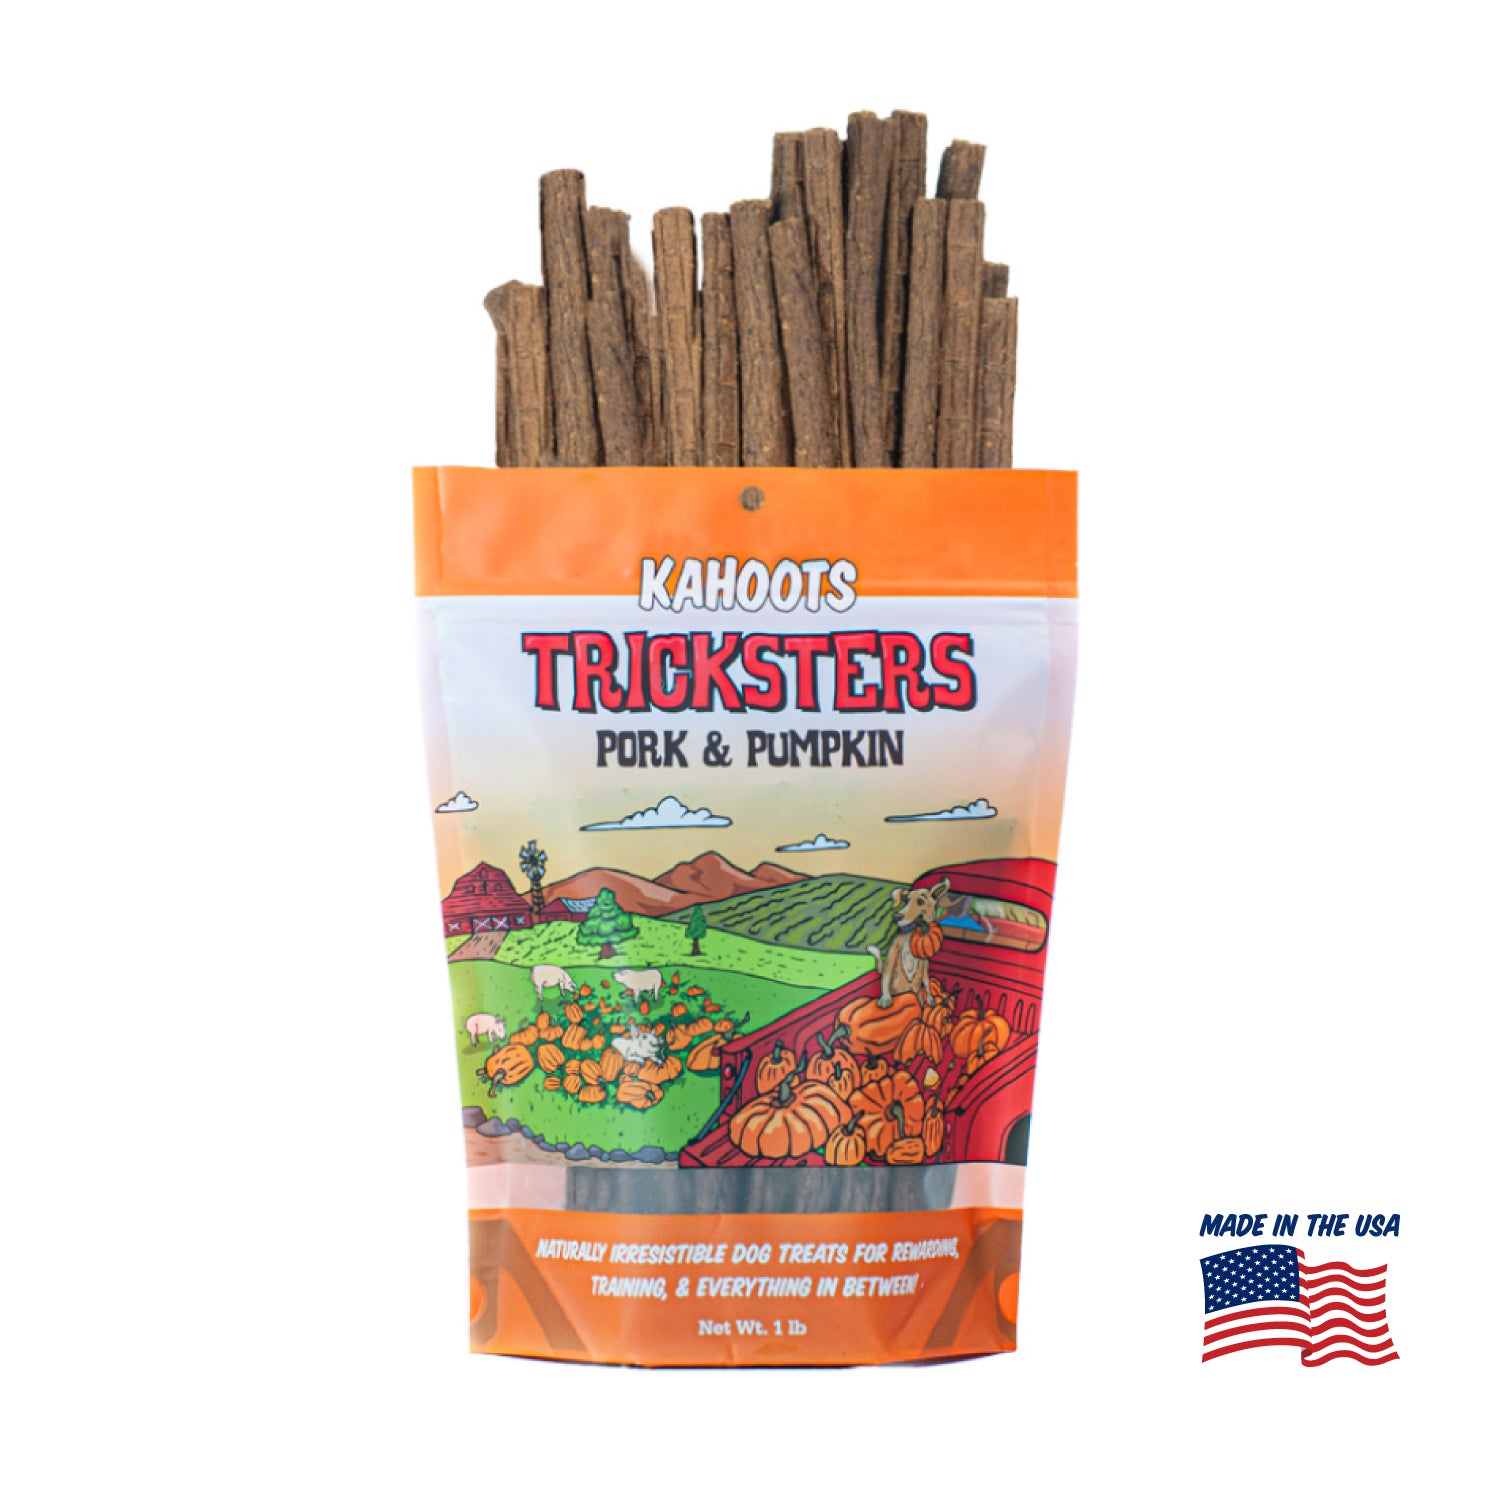 Kahoots pork tricksters packaging. Made in the USA